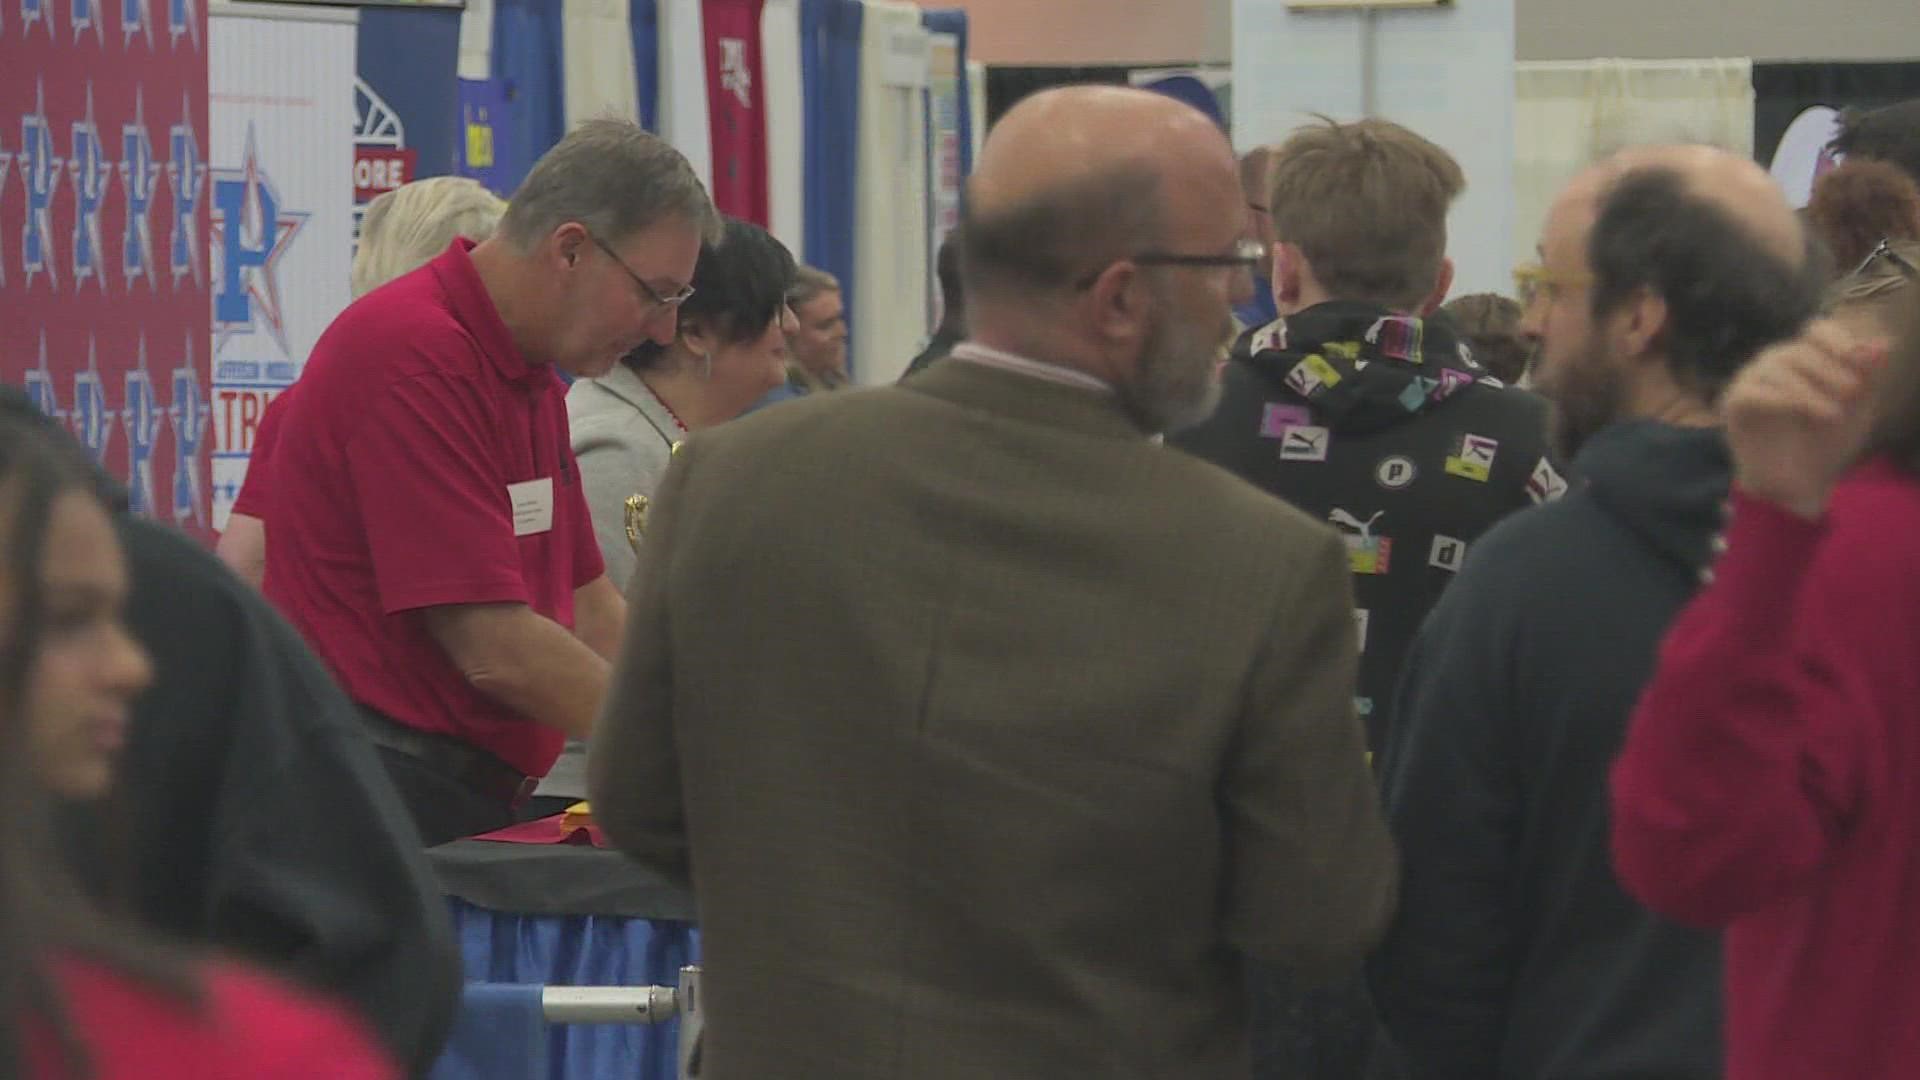 The annual event showed parents their options as they prepare for the first year with school choice.